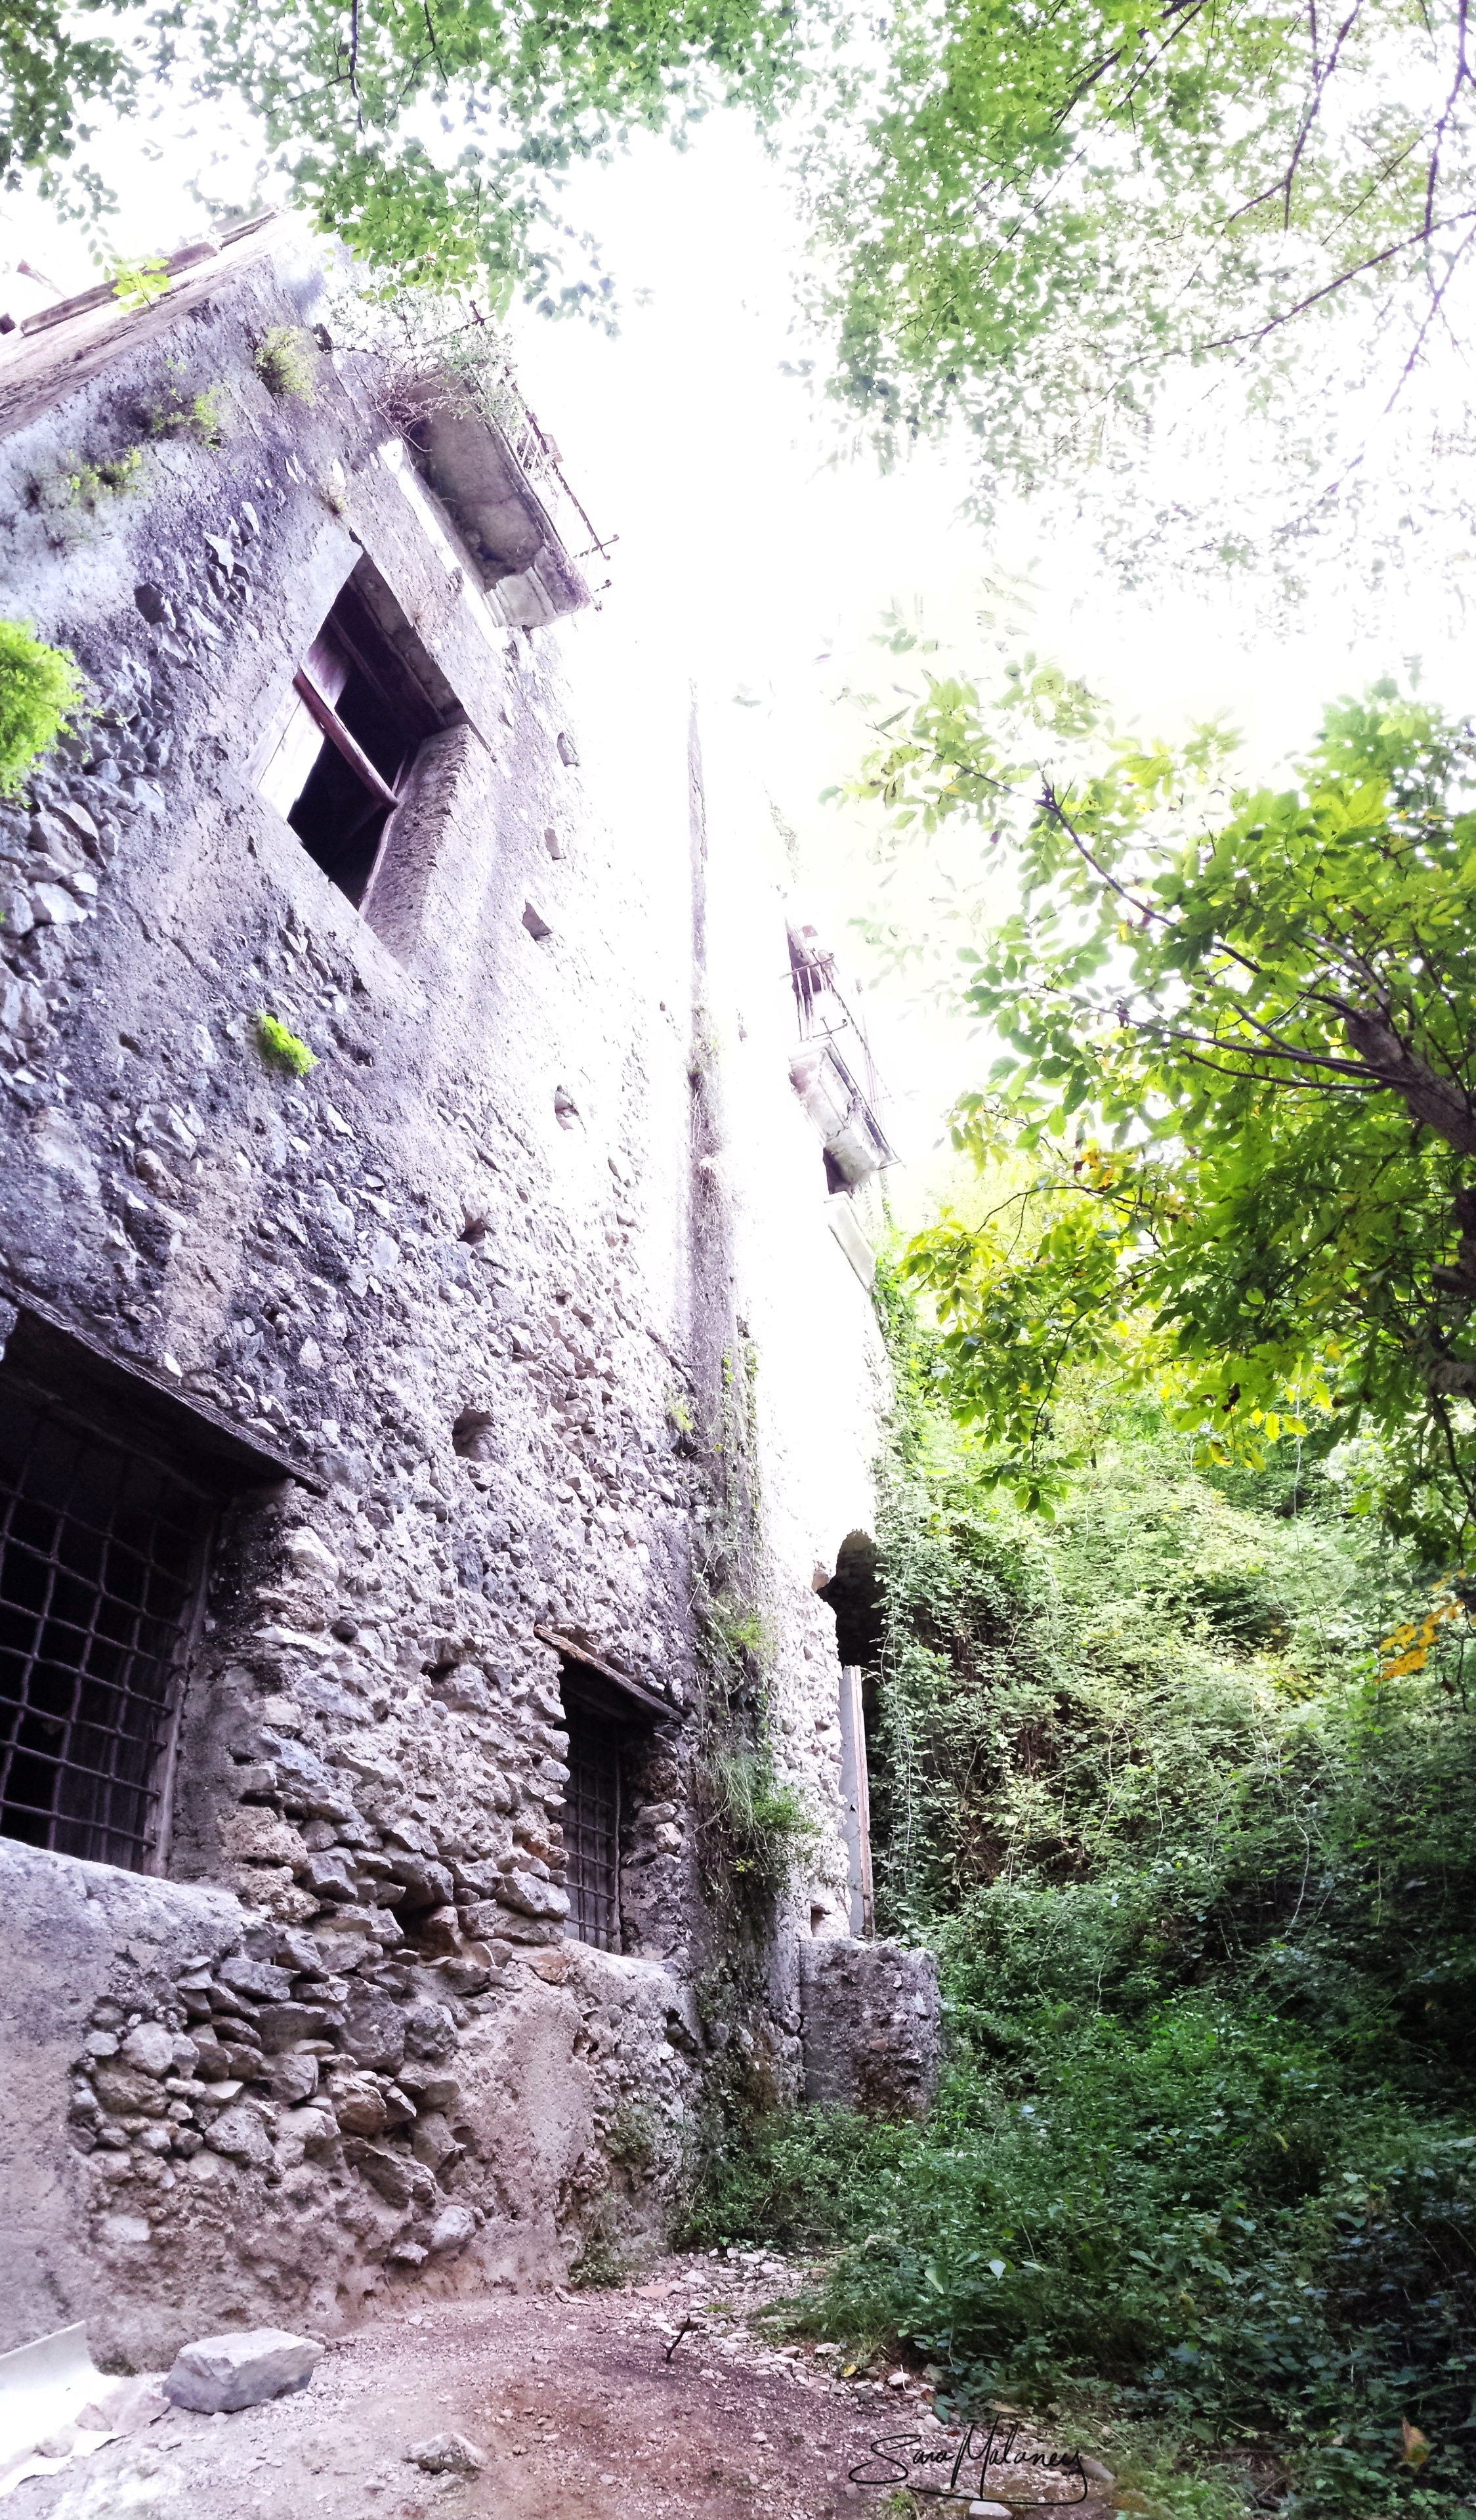 Discovering and exploring the abandoned paper mills while hiking through the hills of the Amalfi Coast.
#adventure #adventureawaits #explore #travel #italy #amalficoast #discover #history #papermills 
#hiking 
#lemons 
#mountains
#waterfall